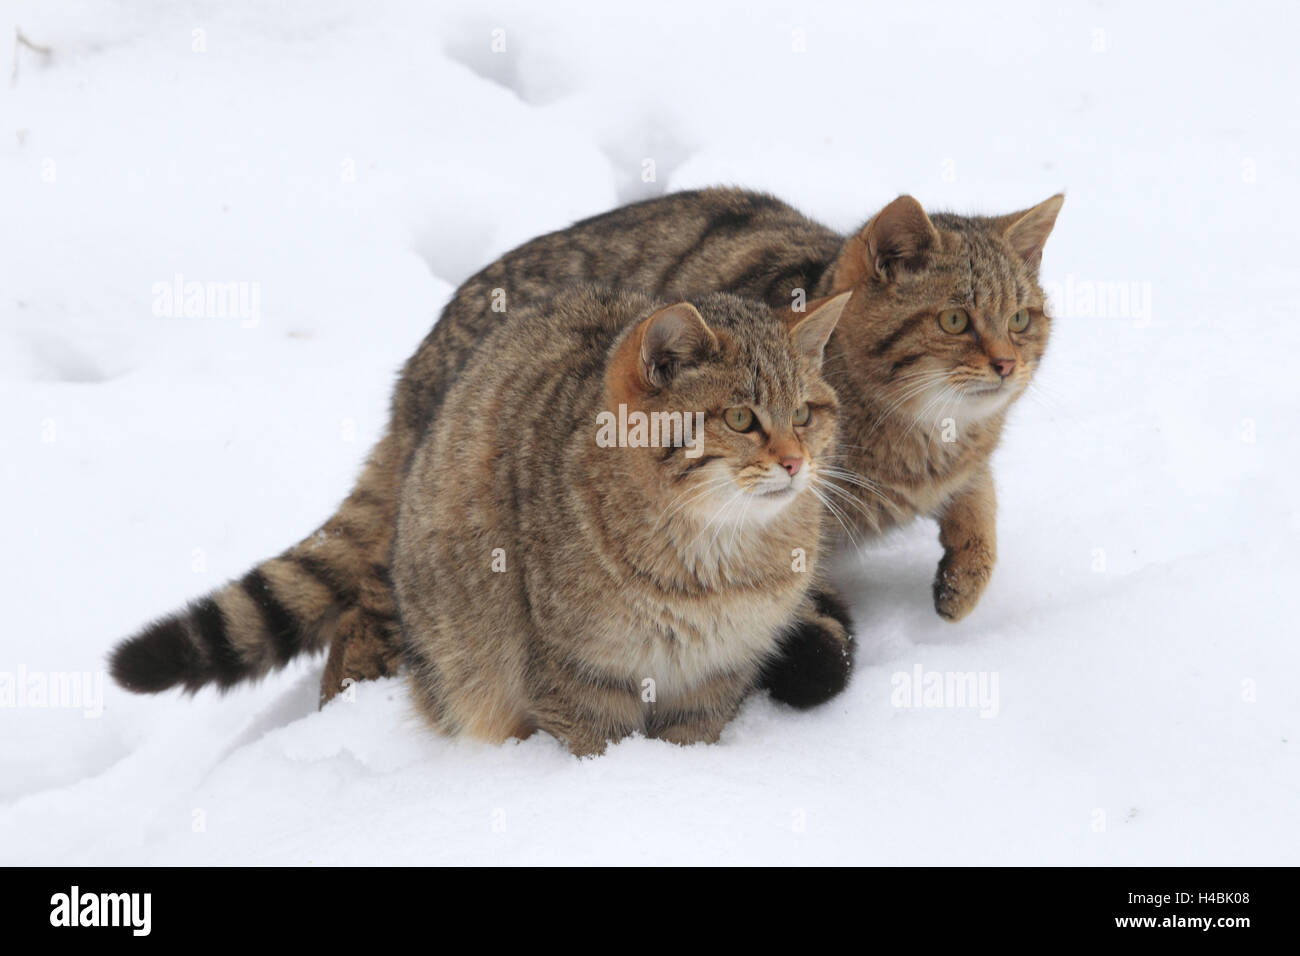 Two European wildcats in the snow, Stock Photo